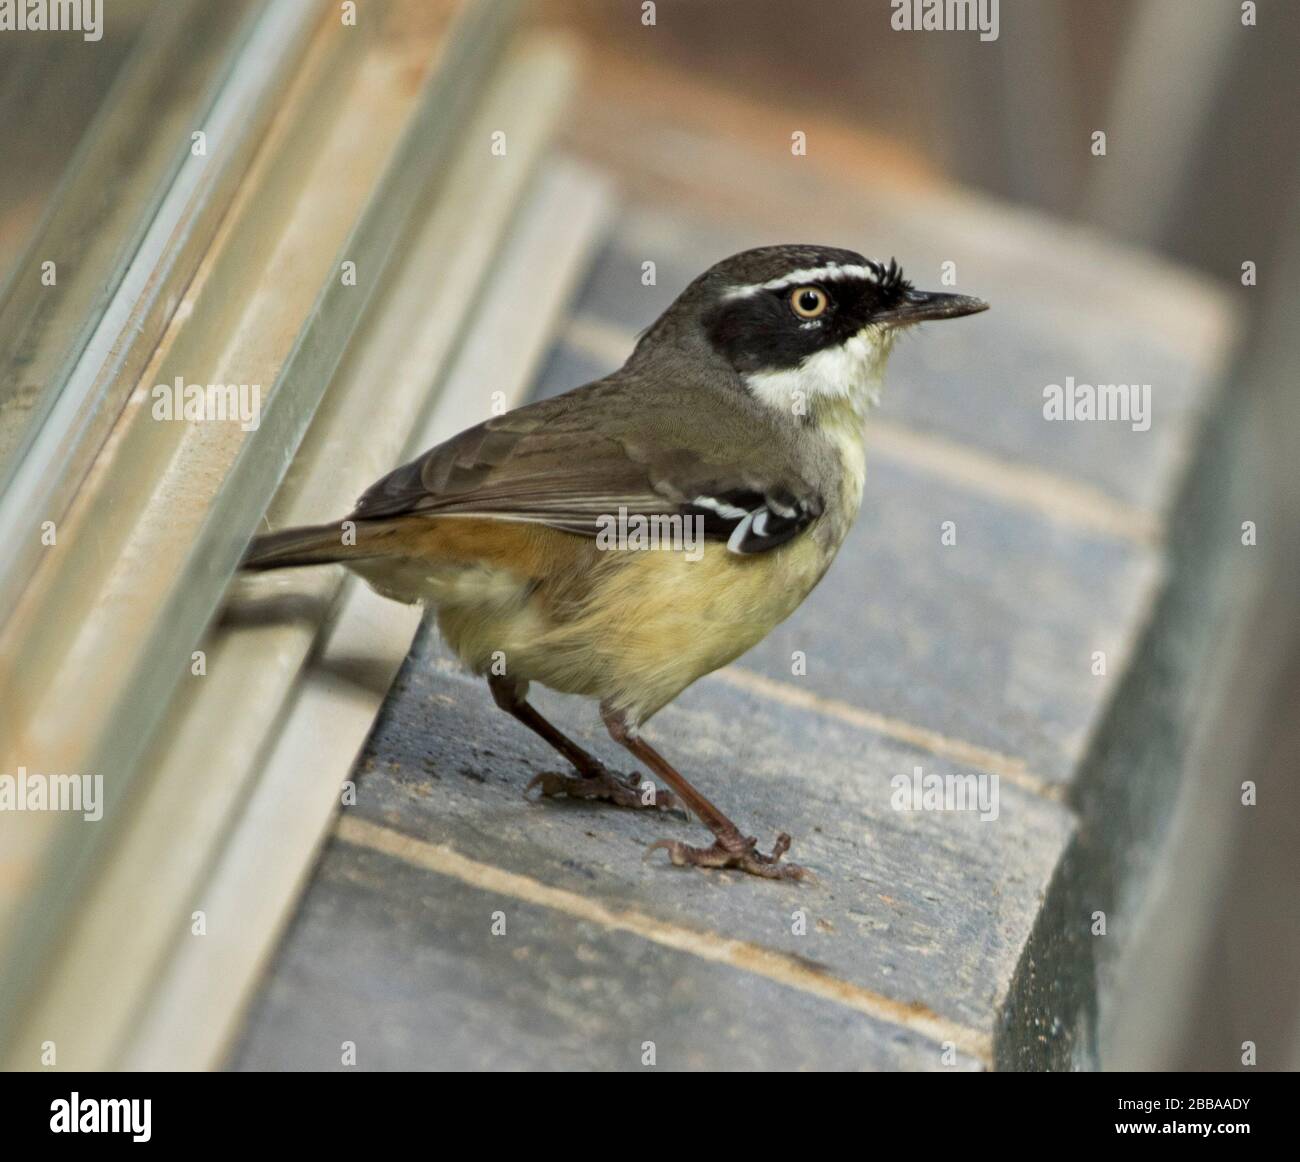 Male yellow-throated scrubwren, Sericornis citreogularis, with alert expression, on the window sill of a house in Australia Stock Photo